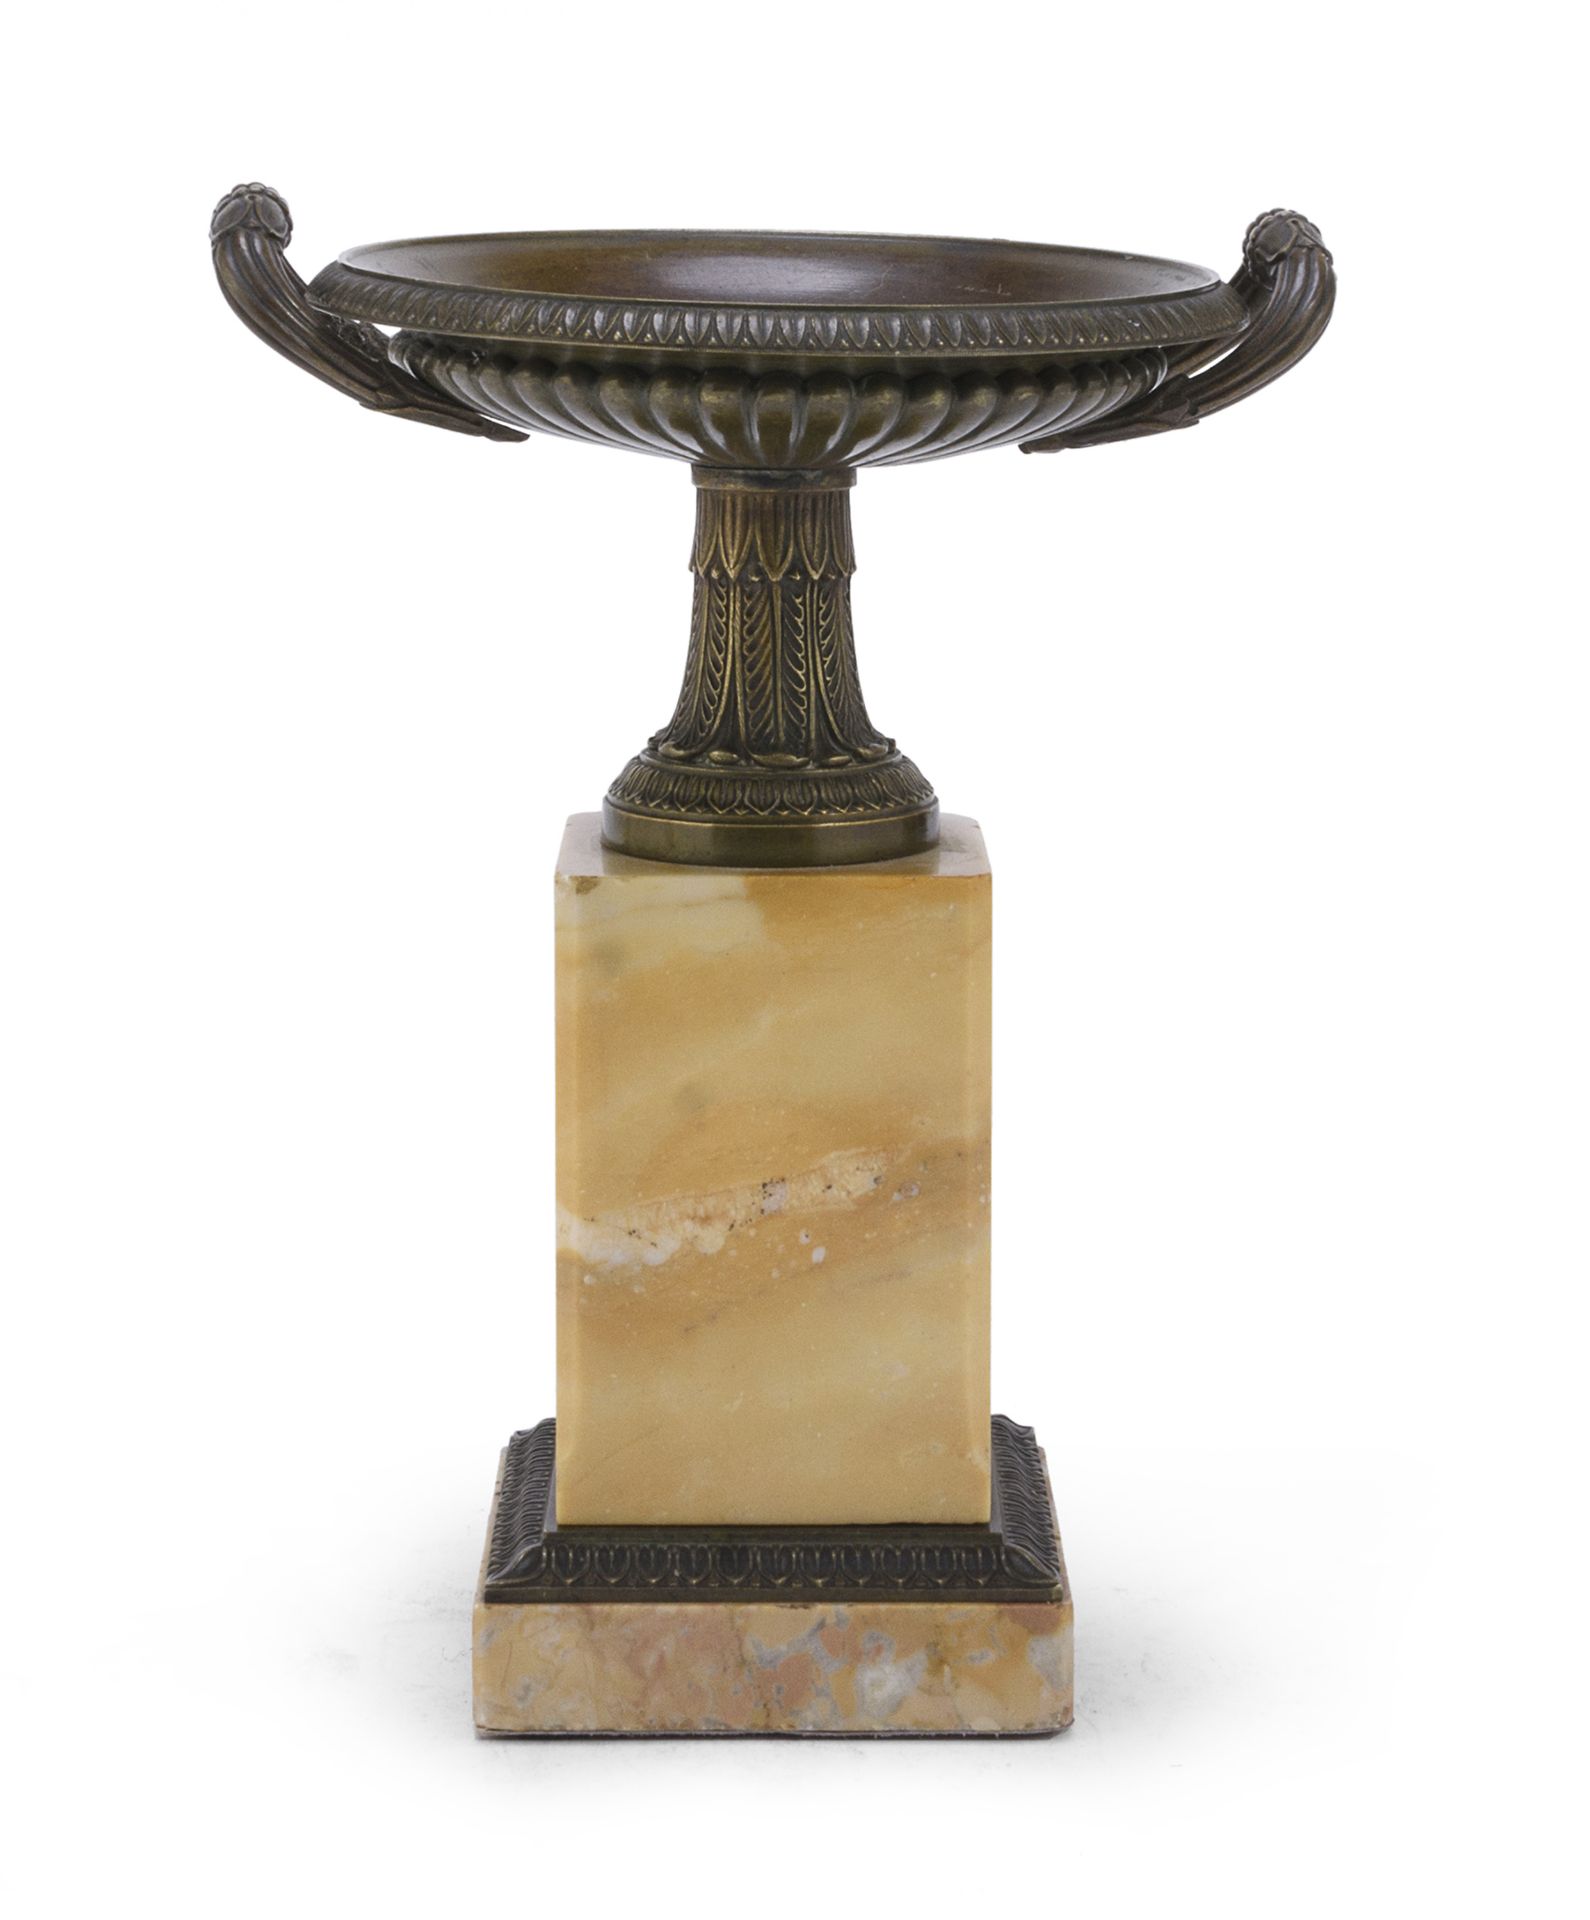 MODEL OF CLASSIC CUP IN BRONZE AND MARBLE EARLY 19TH CENTURY